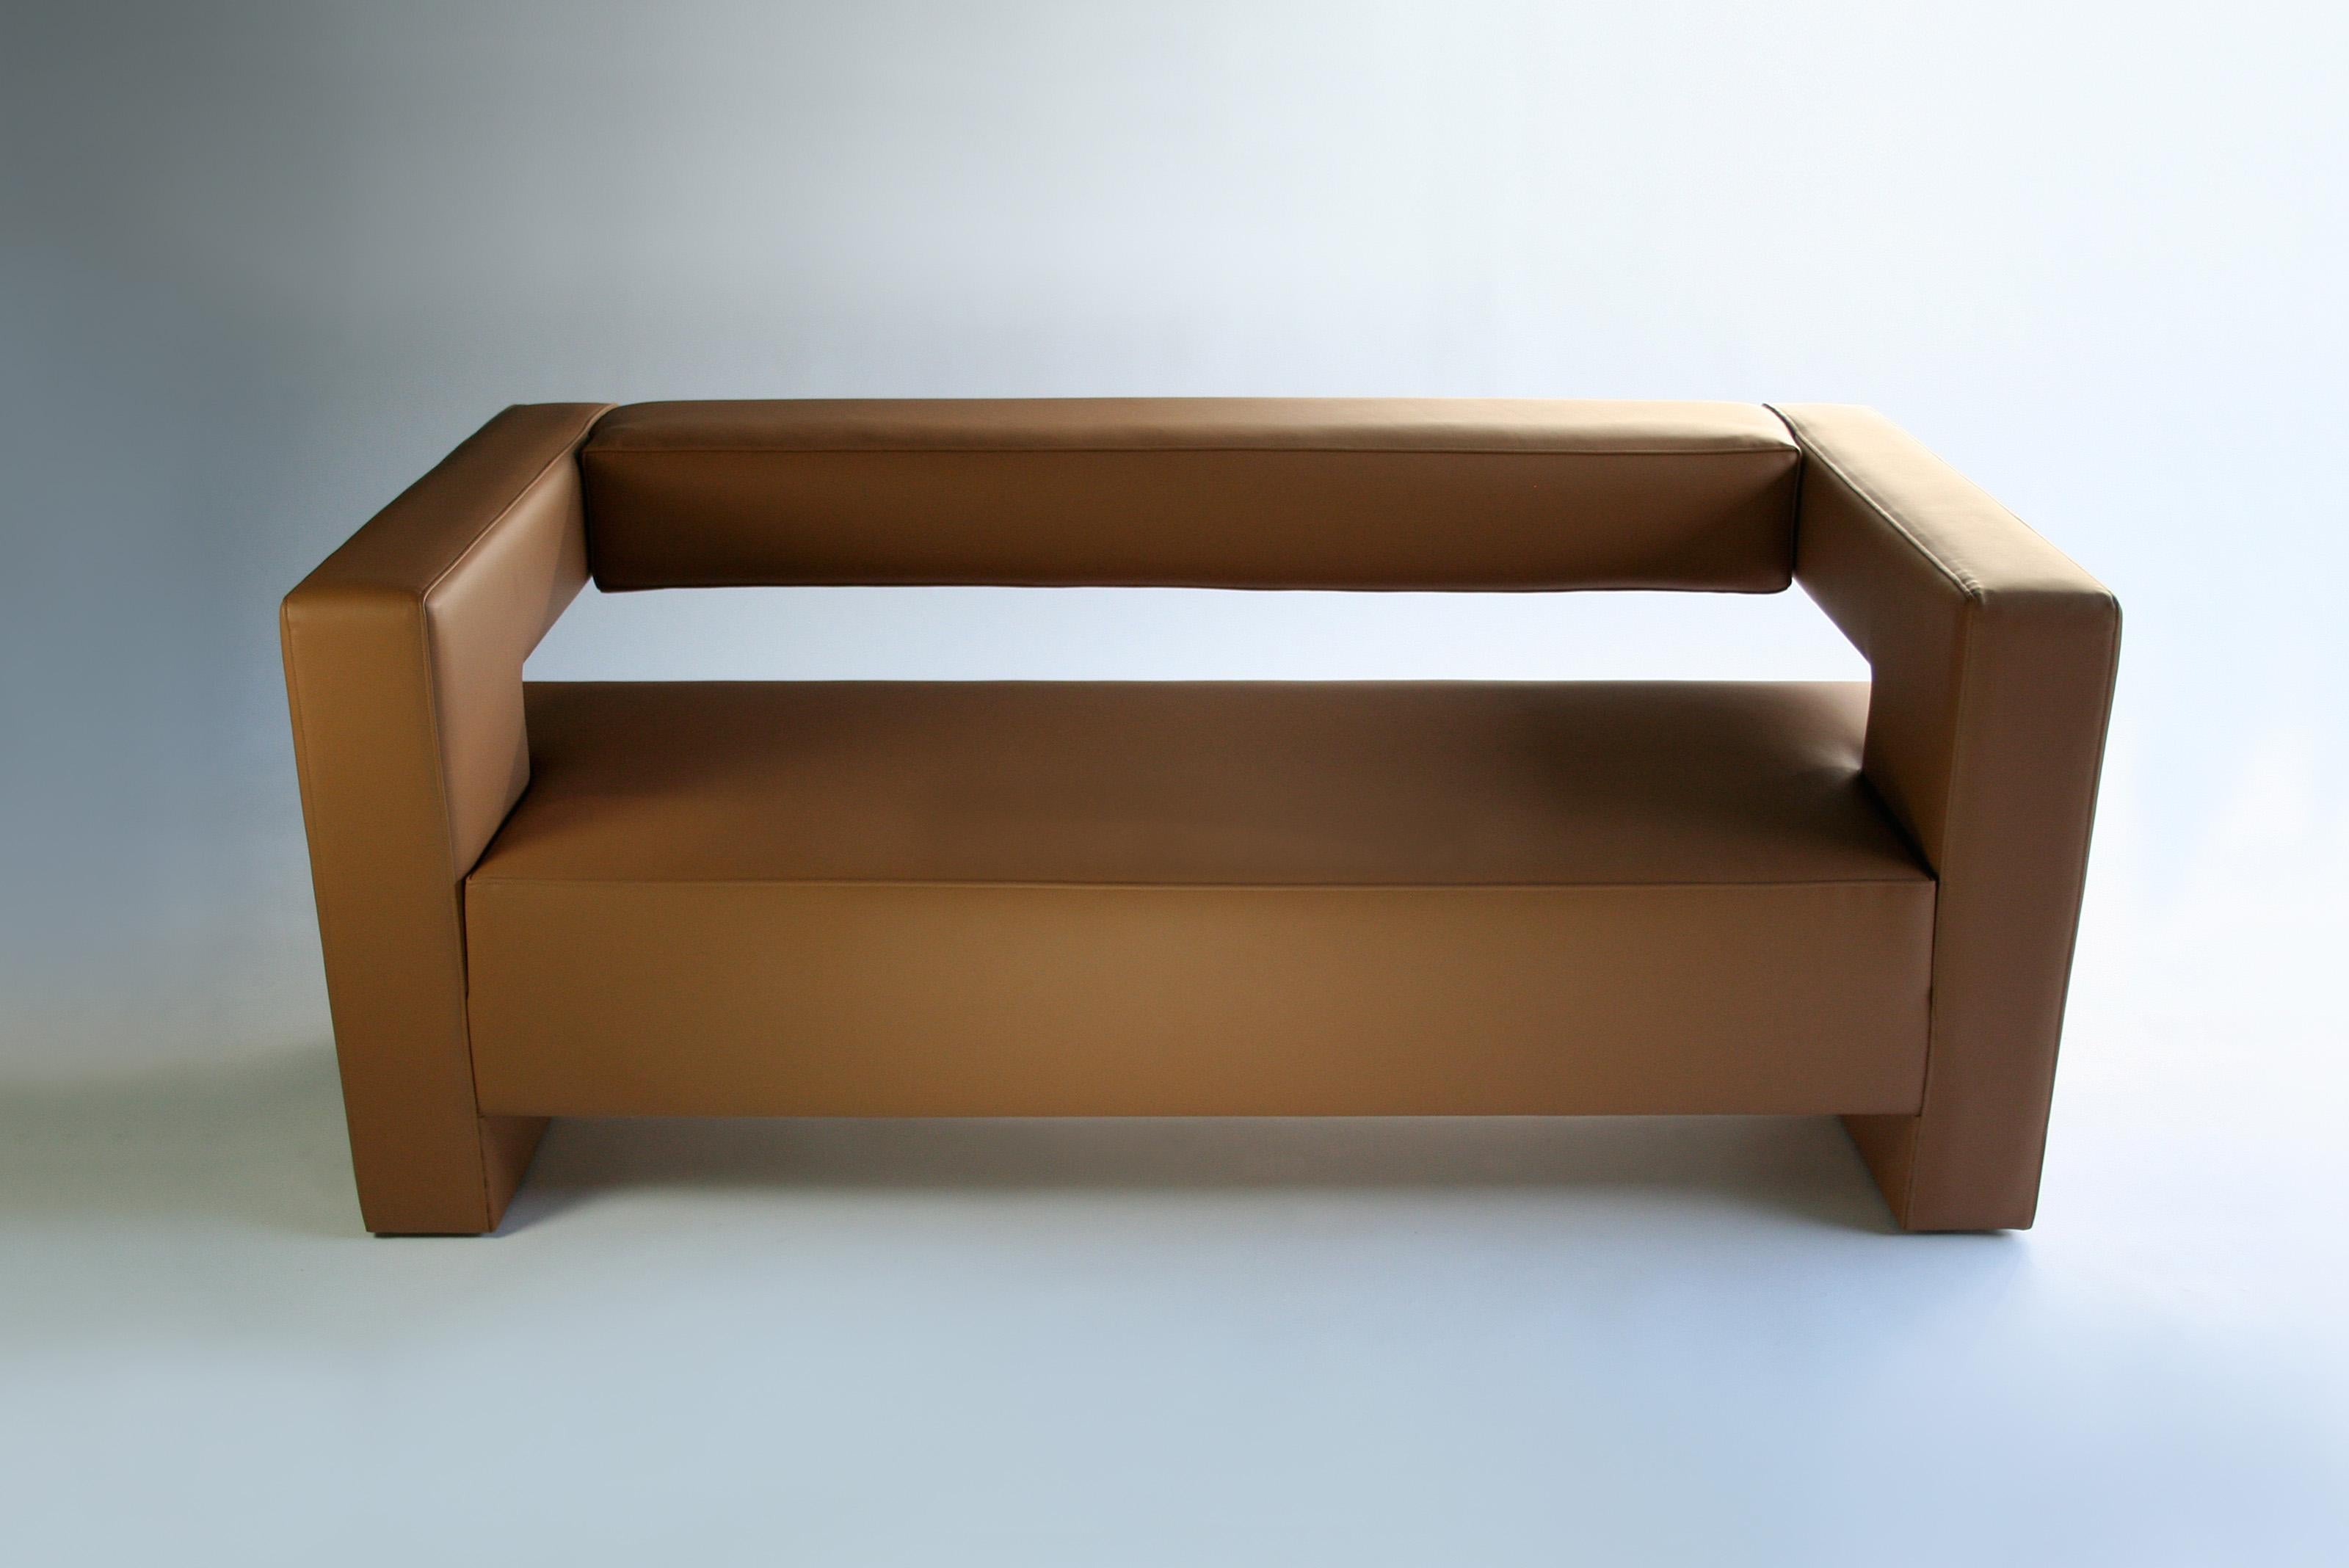 BB Leather Sofa by Phase Design
Dimensions: D 83,8 x W 238,8 x H 63,5 cm.
Materials: Wood and leather.

Wood construction with upholstered body. Upholstery may be sourced in Customer Own Material (COM), Customer Own Leather (COL), or in Phase